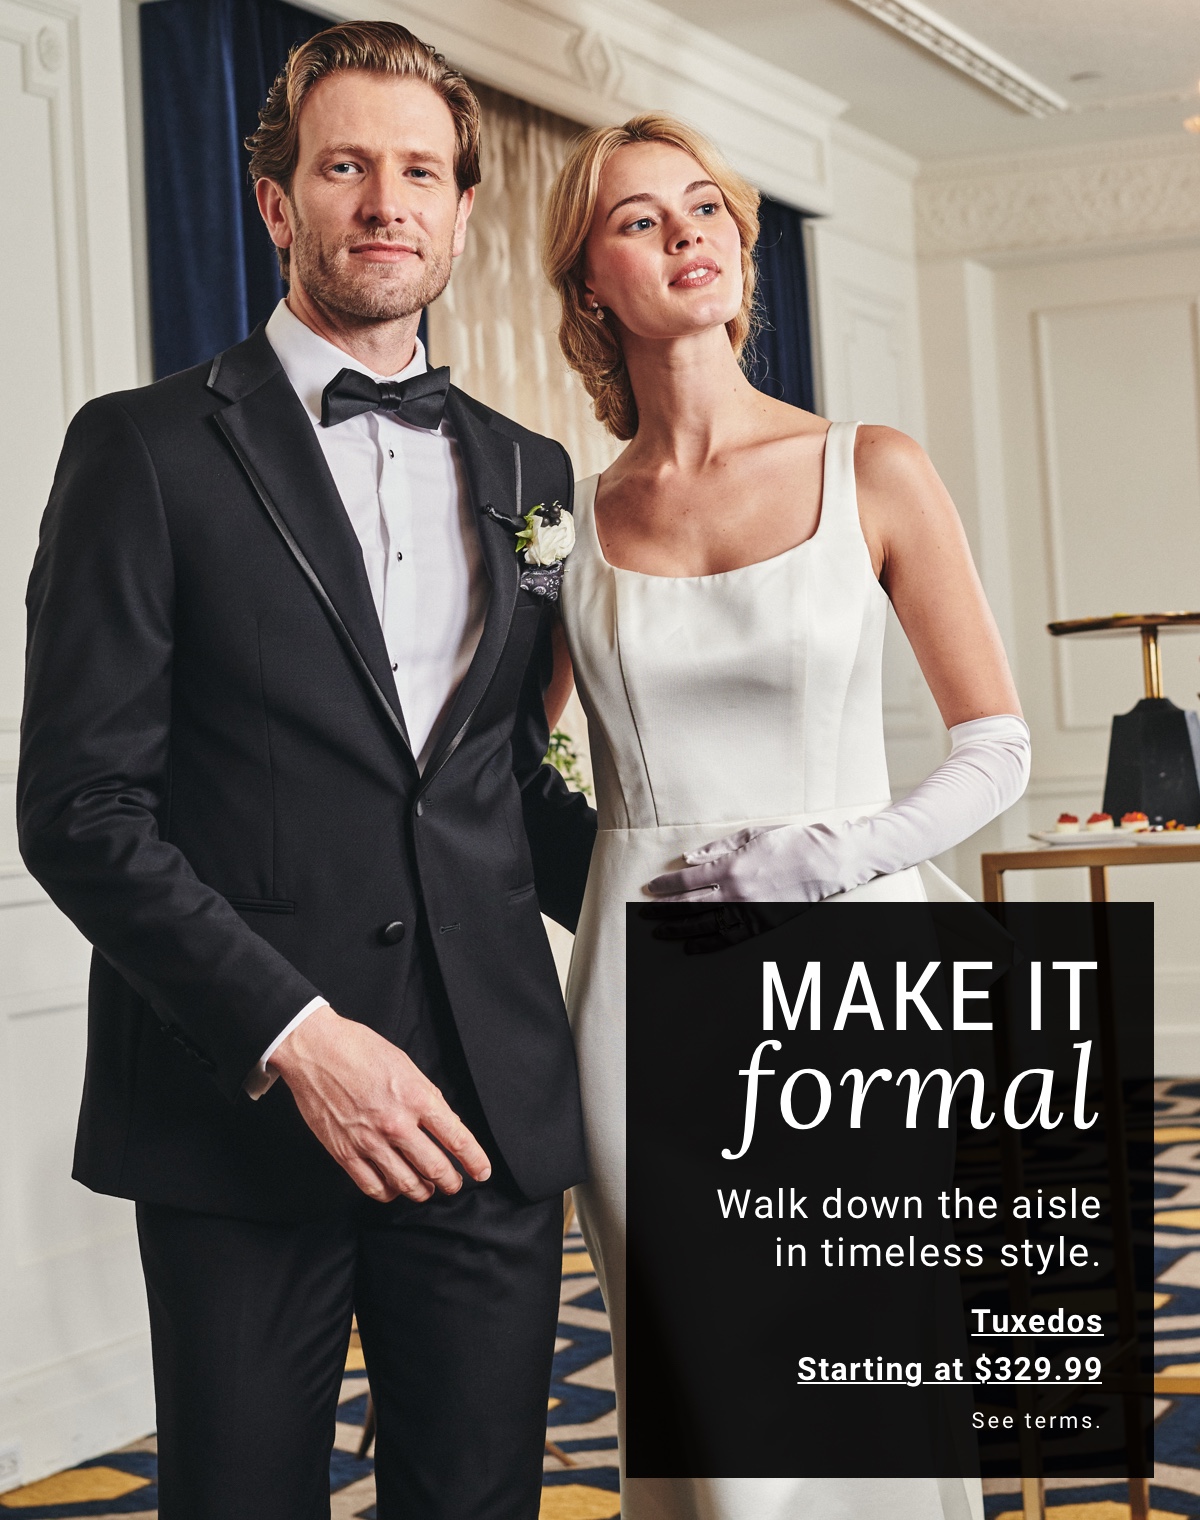 Make it formal - Walk down the aisle in timeless style | Tuxedos Starting at $329.99